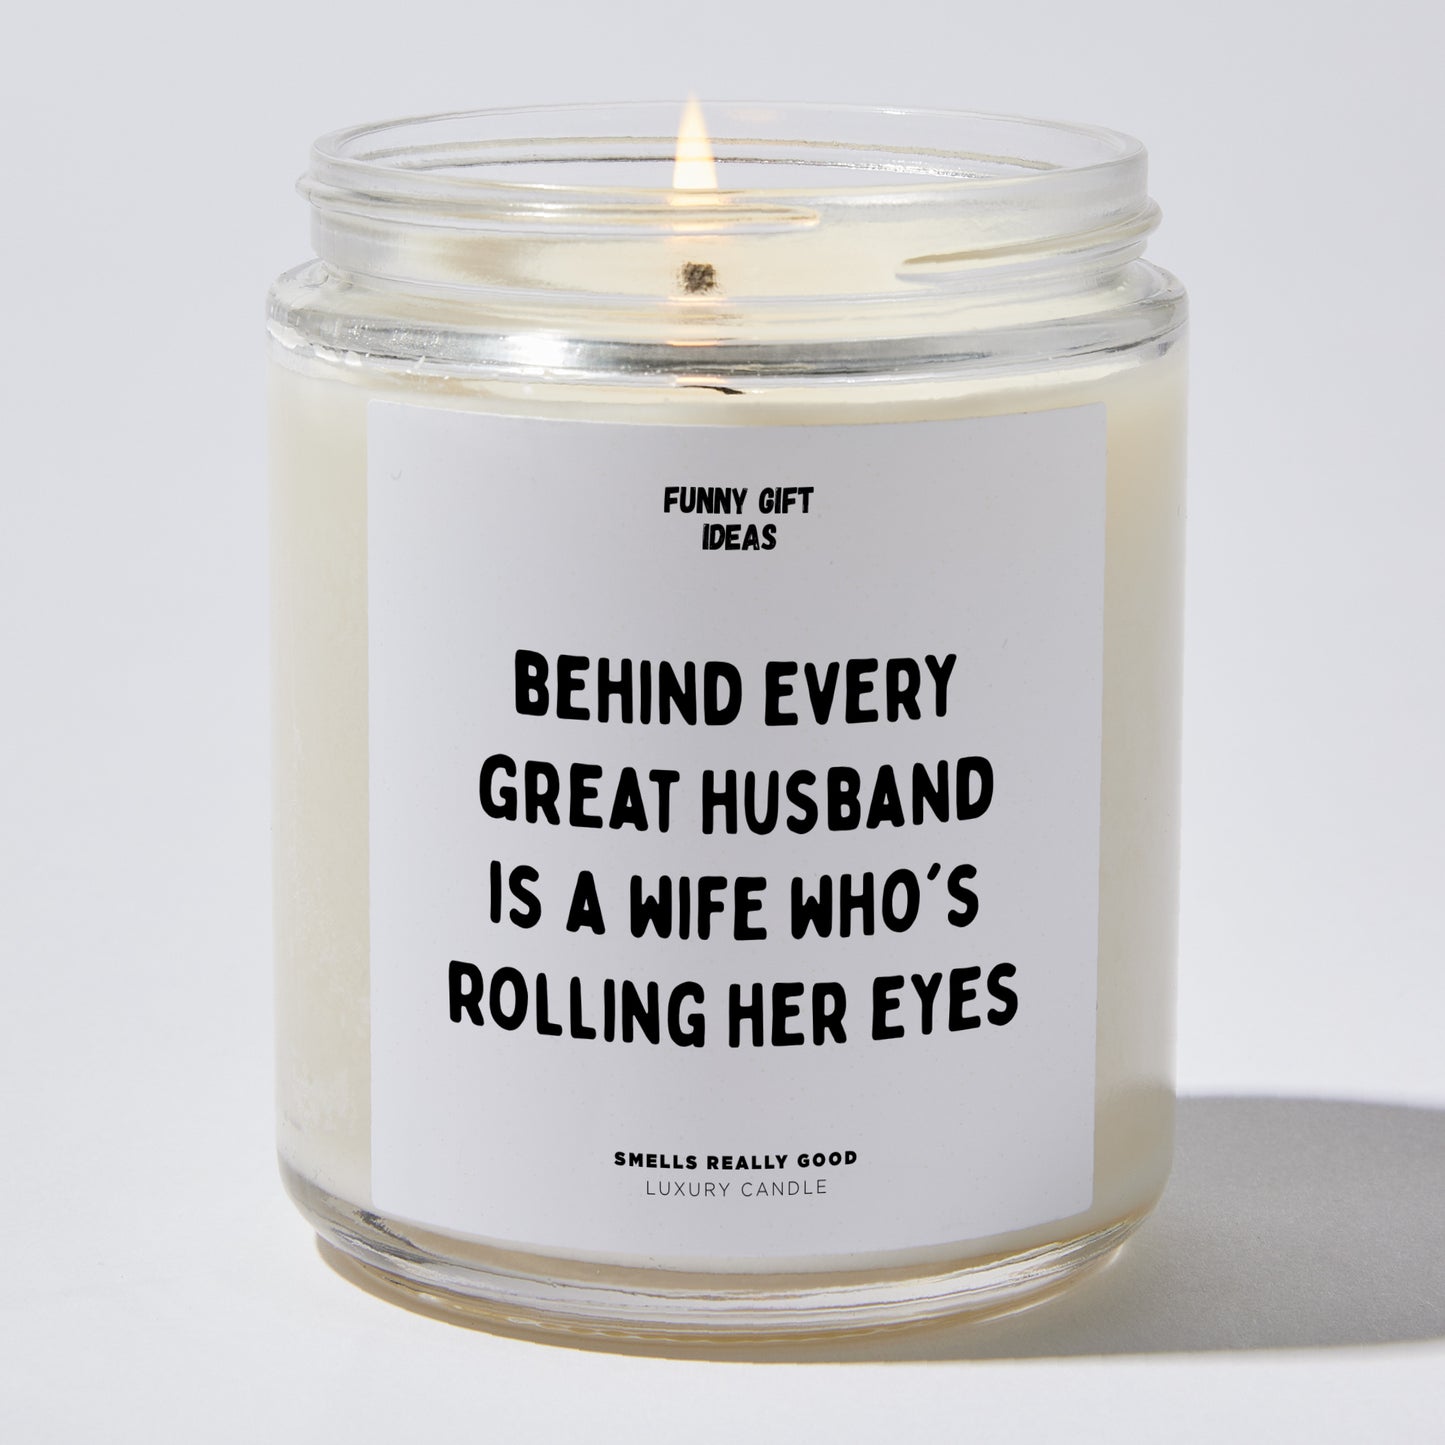 Anniversary Present - Behind Every Great Husband is a Wife Who's Rolling Her Eyes. - Candle